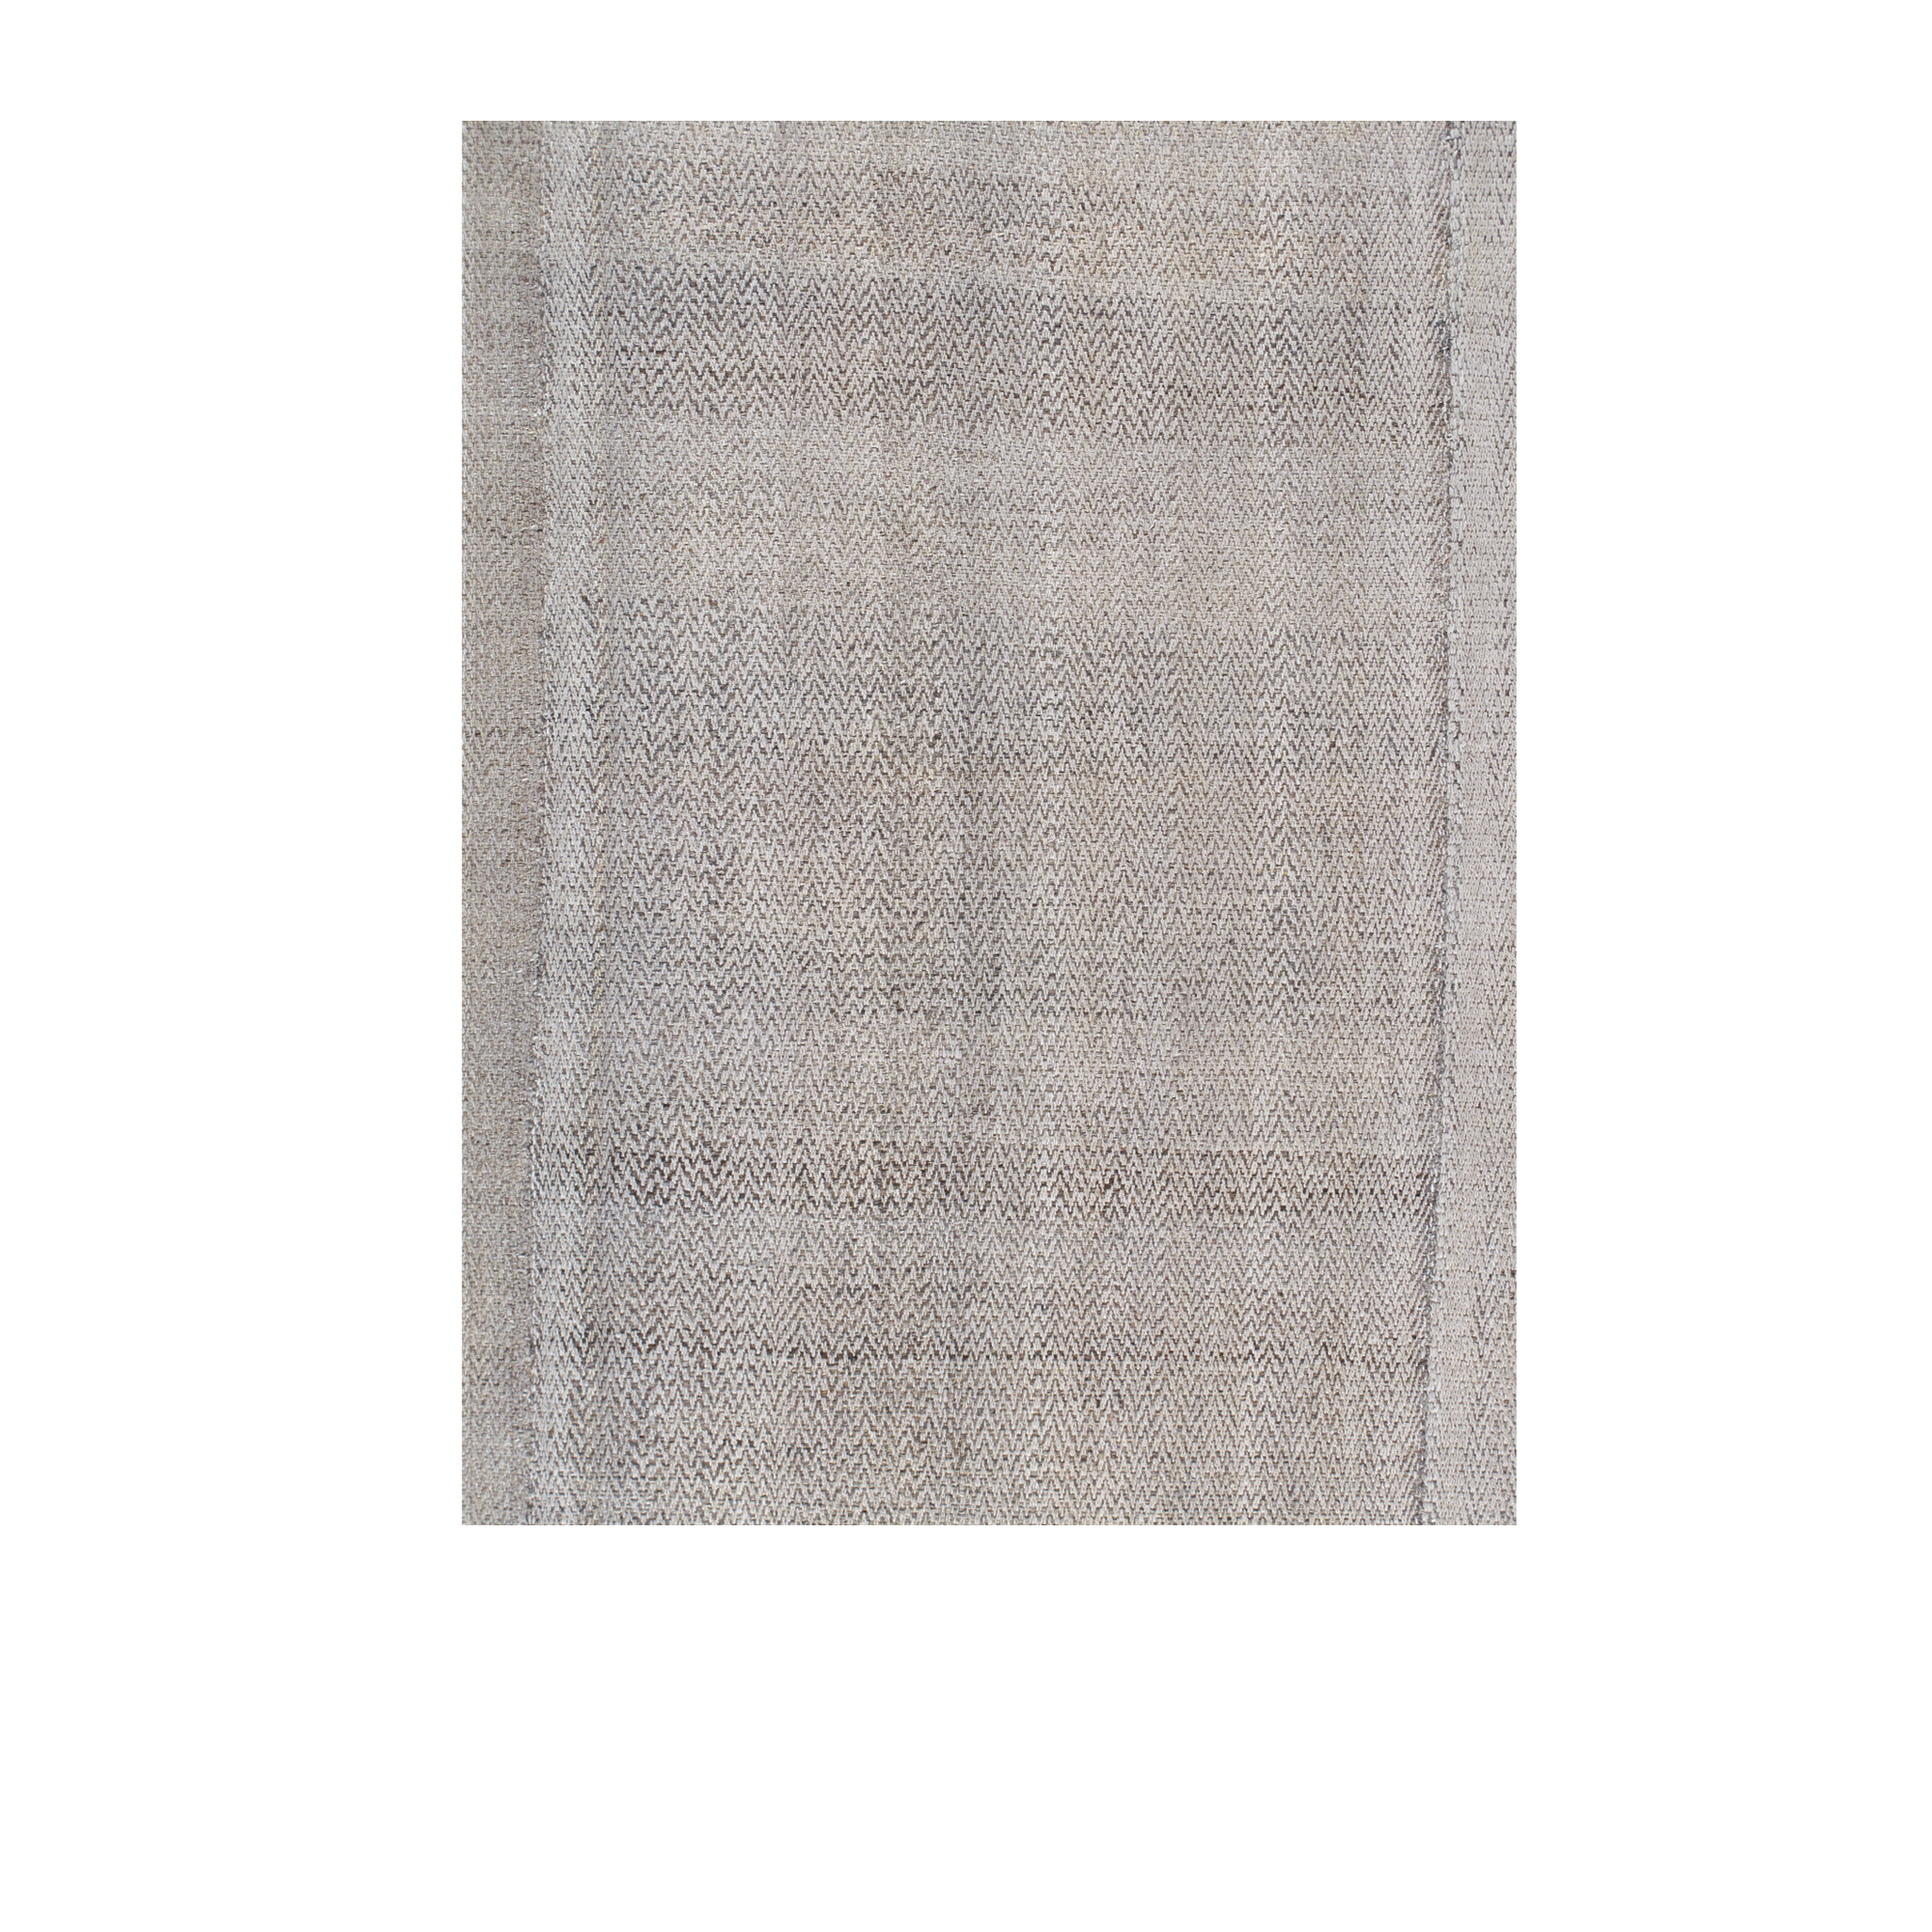 This Charmo flatweave rug is hand-knotted and made of 100% wool.